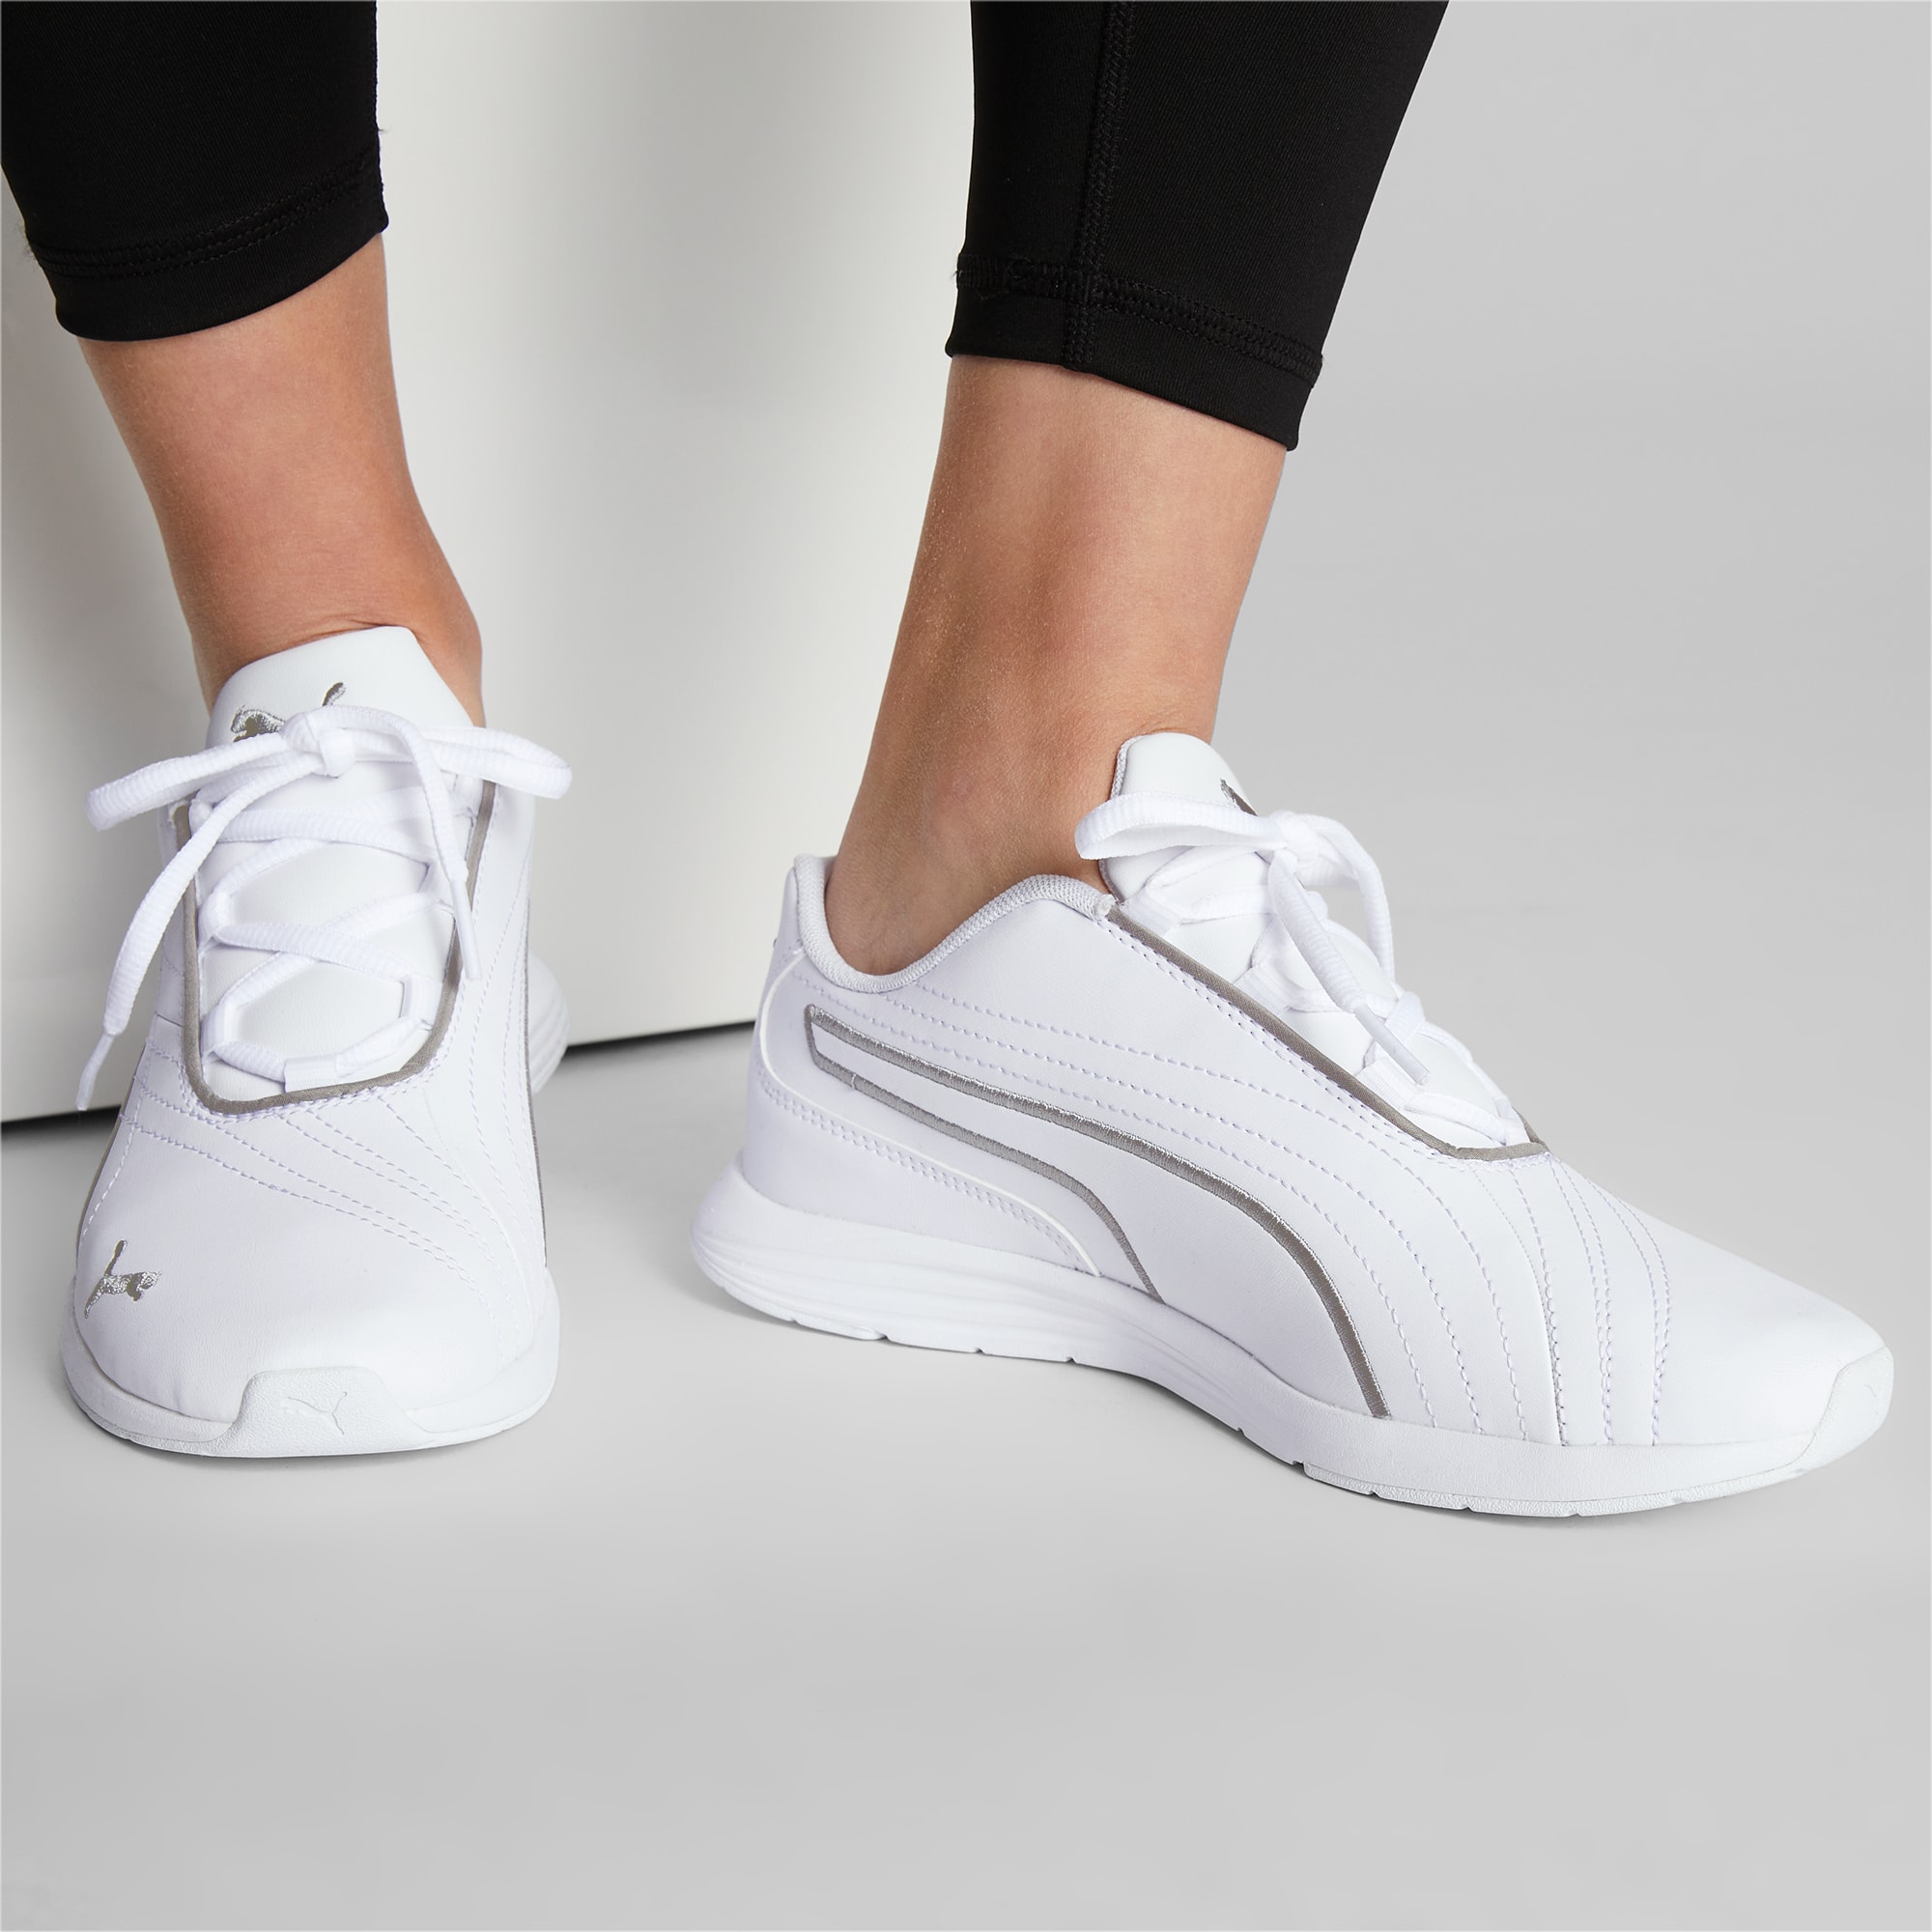 Puma Ella Lace-Up Wns White Silver Women LifeStyle Casual Shoes 193919-01